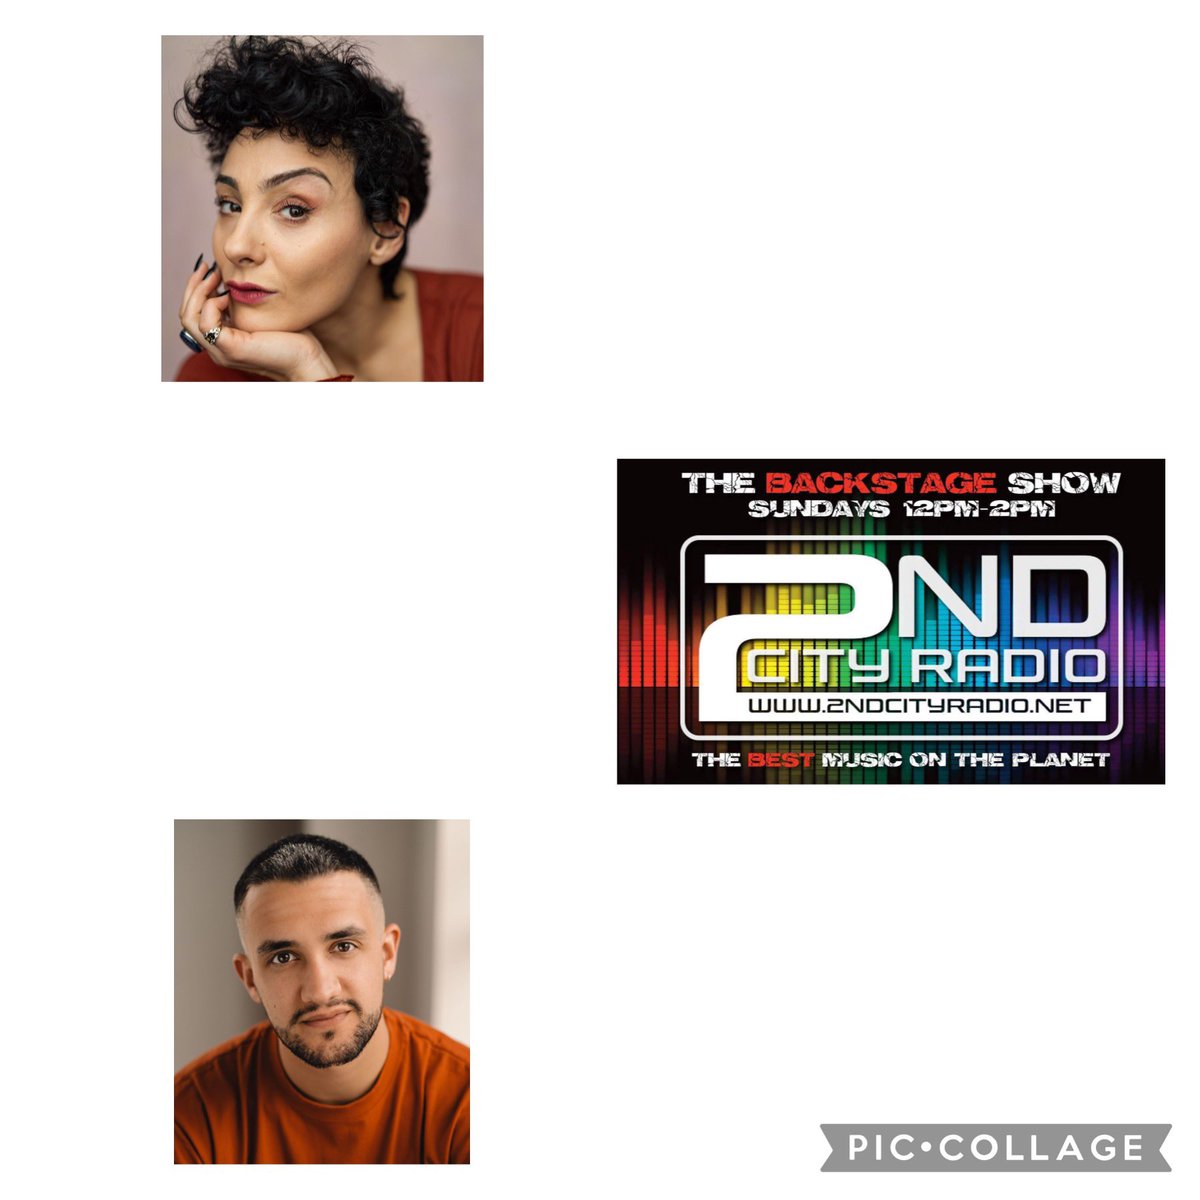 Live from 12pm today #Backstage @SECONDCITYRADIO with guests @lil_Pacho @VixHamBarritt plus the latest theatre news & some fine music. Join us at 2ndcityradio.net #theatre @About_GracePR @franticassembly @arabellanr @broncobillyshow @CharingCrossThr #musicaltheatre